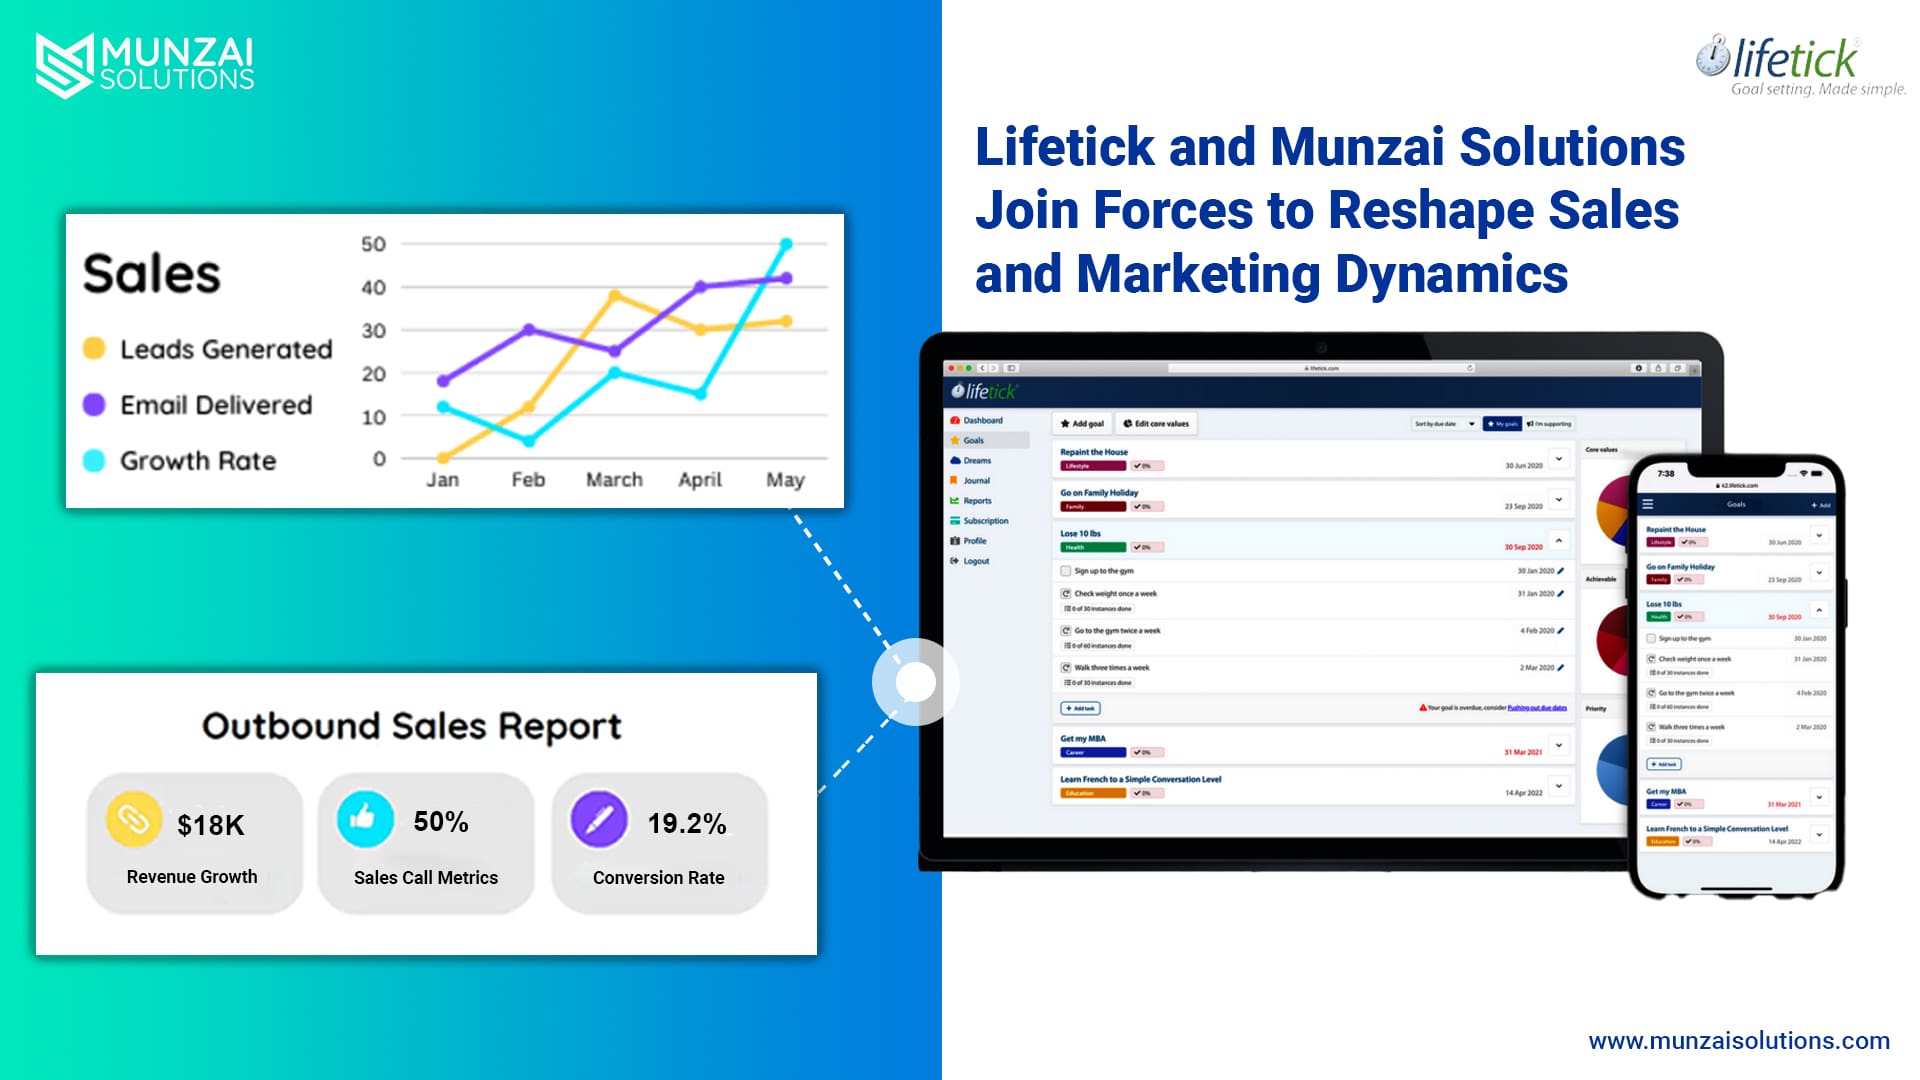 Lifetick CaseStudy with Munzai Solutions